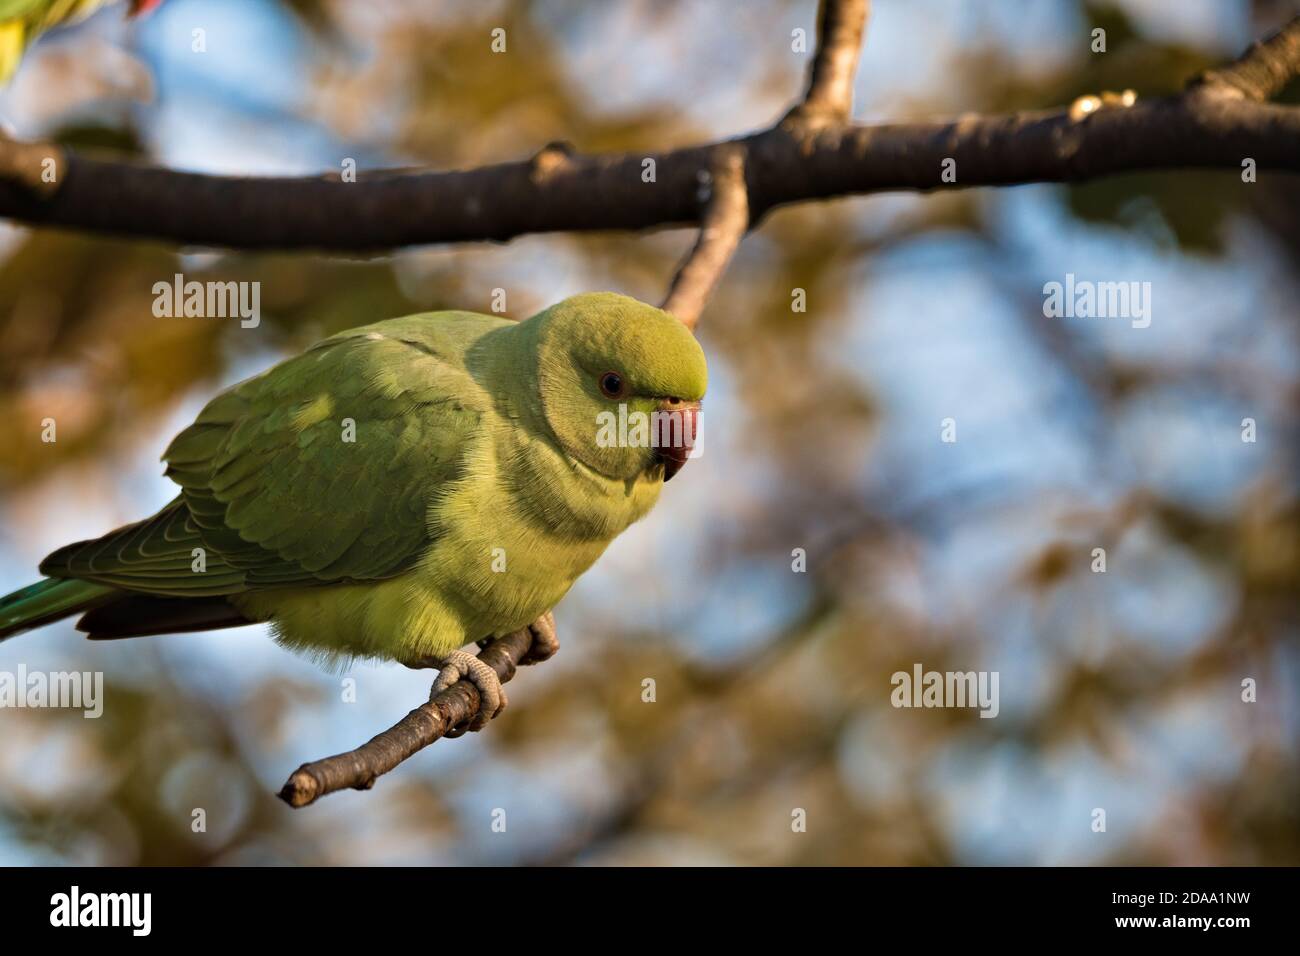 Green rose ringed parakeet, Psittacula krameri, resting on a branch in the treetops Stock Photo